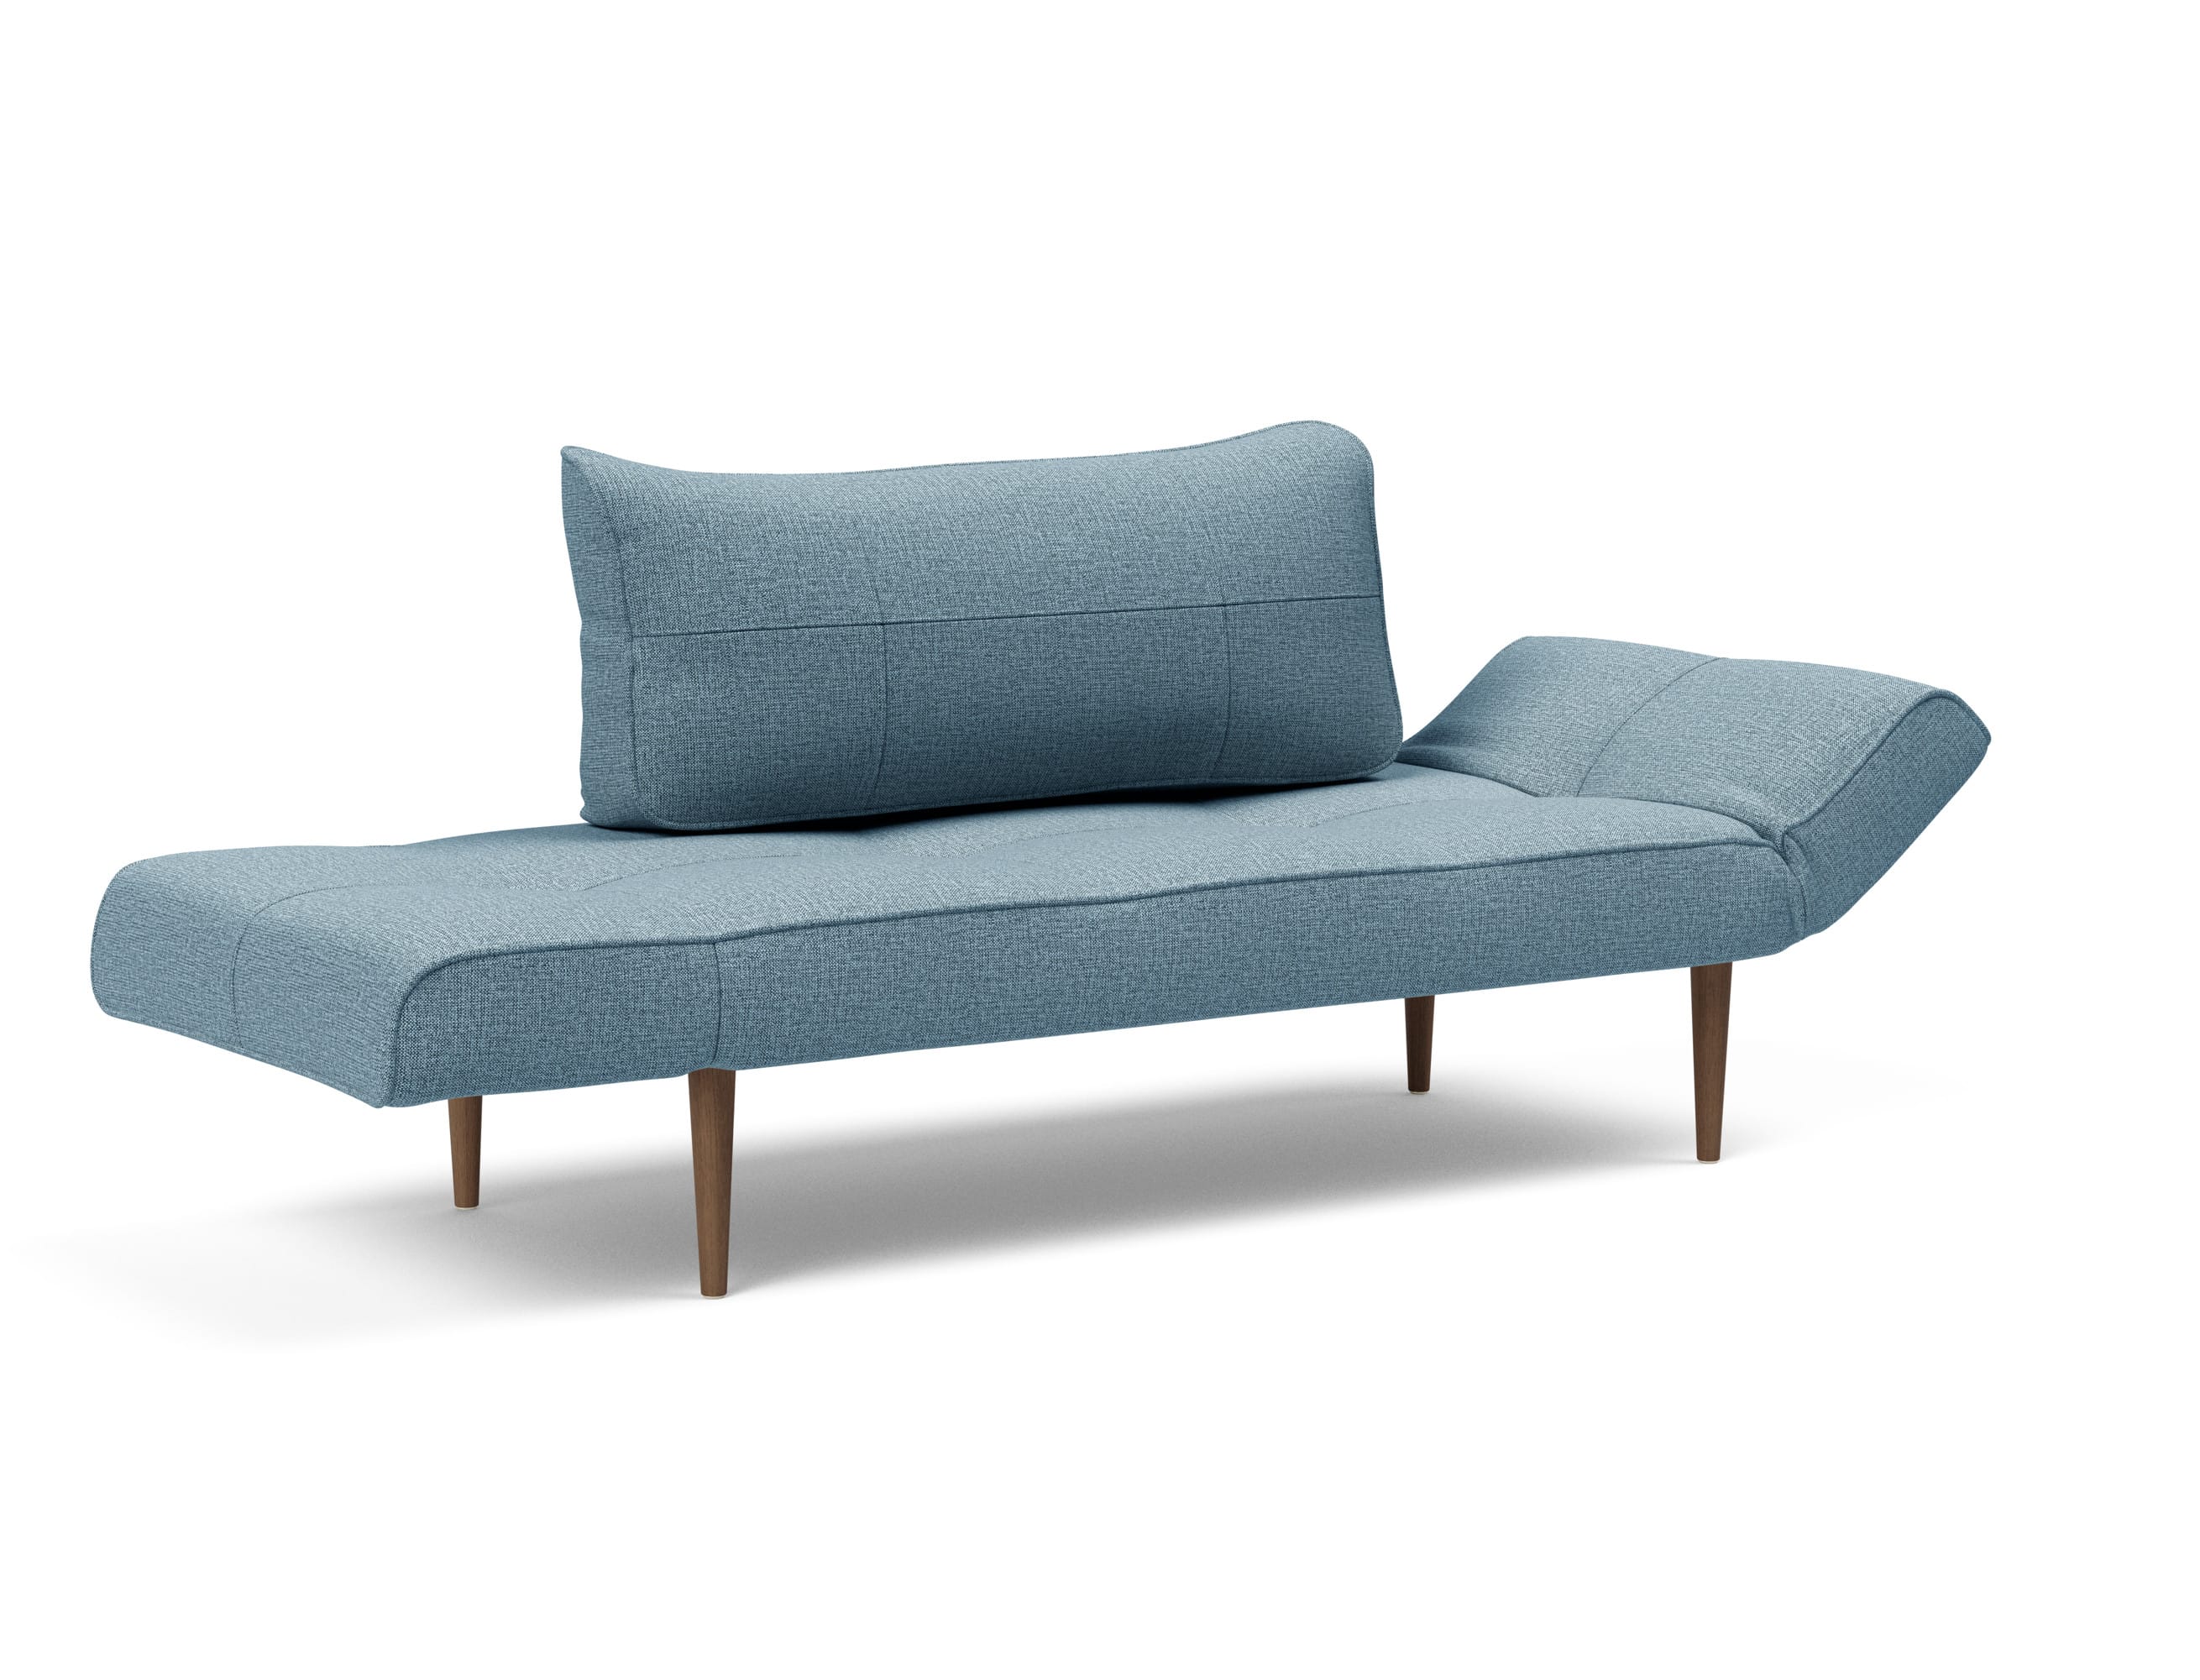 Zeal Deluxe Daybed Sofa Bed Mixed Dance Light Blue by Innovation